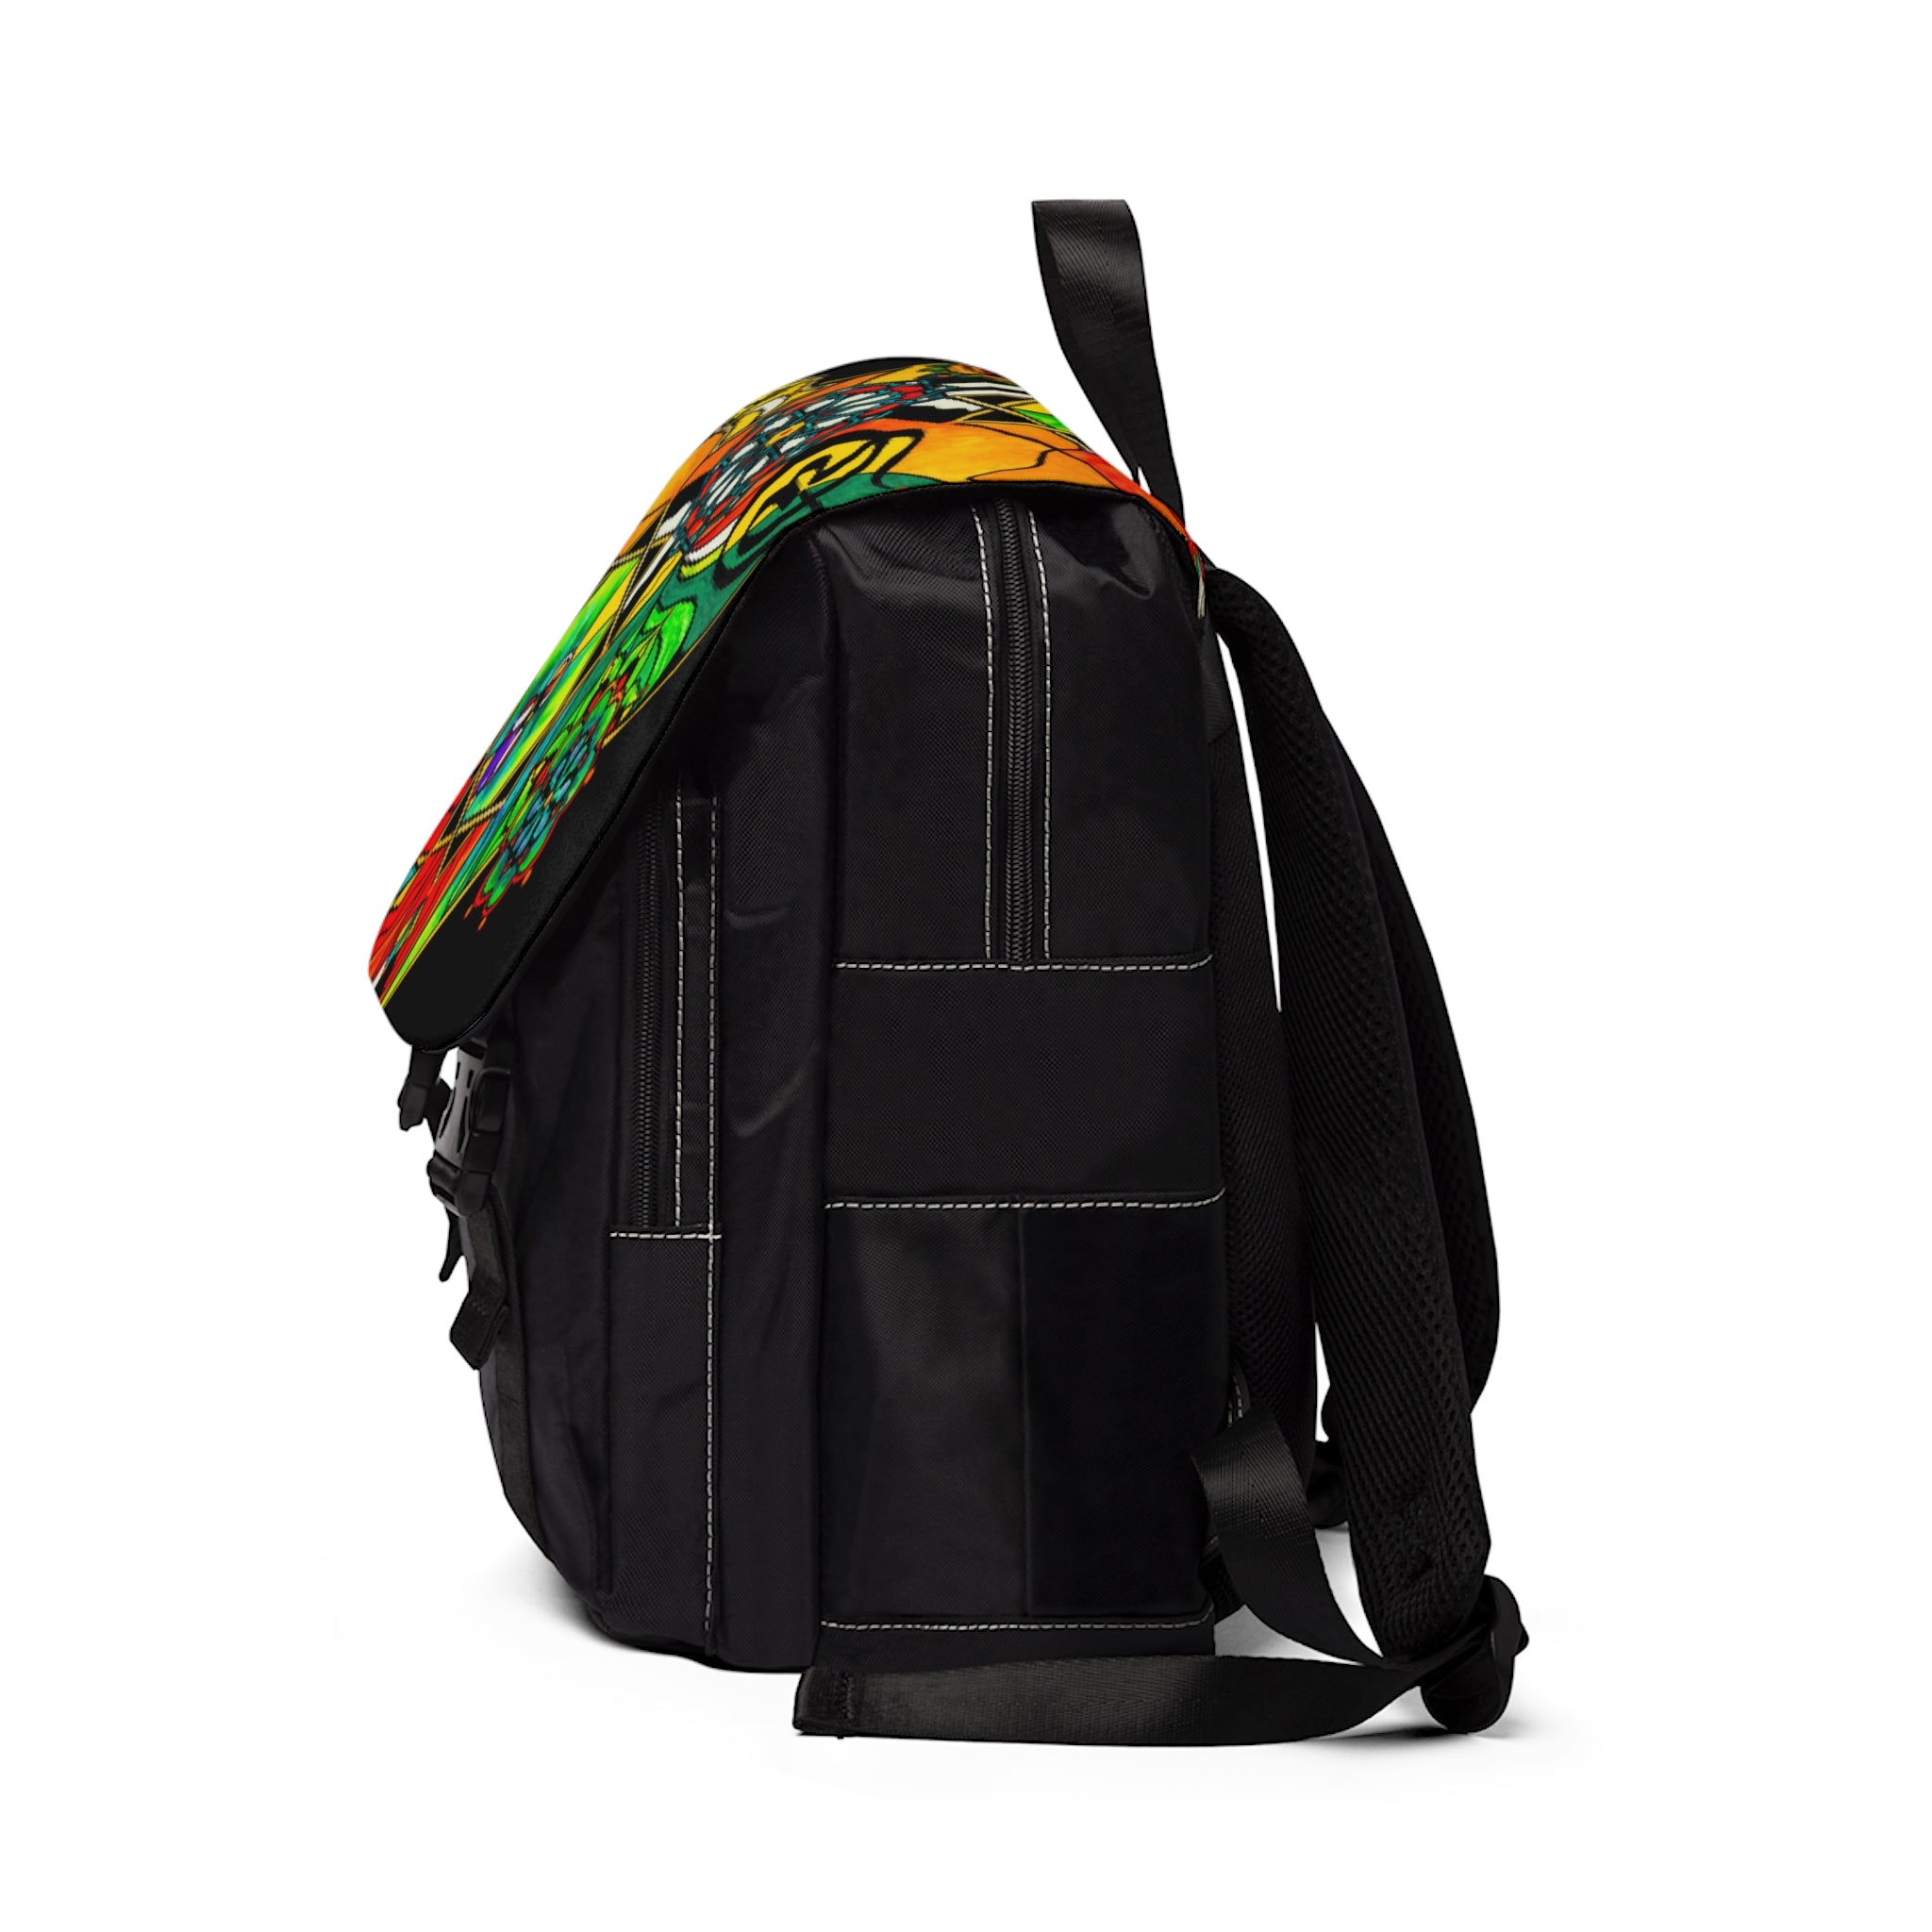 we-believe-in-helping-you-find-the-perfect-muhammad-consciousness-unisex-casual-shoulder-backpack-online_2.jpg